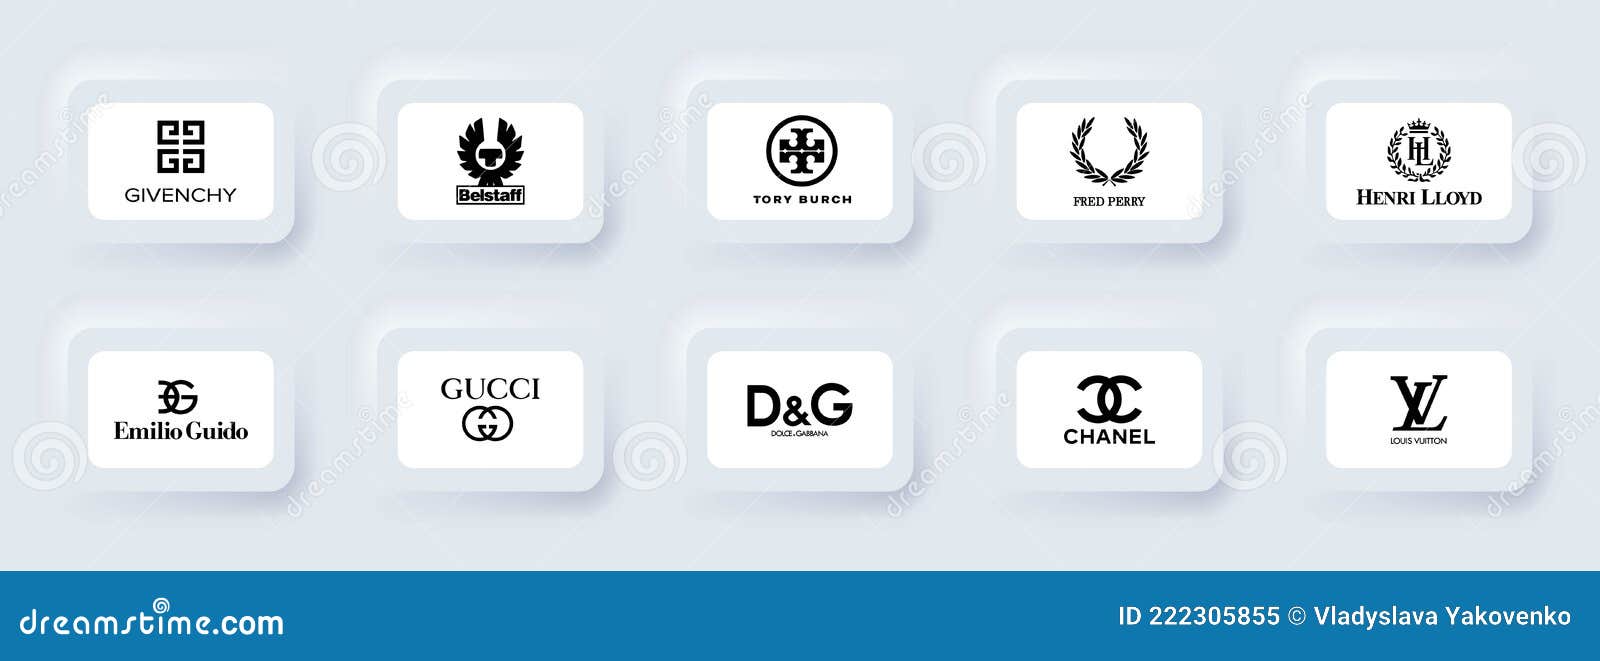 Top Most Popular Clothing Brands. Logo, Icons: GUCCI, Dolce ...